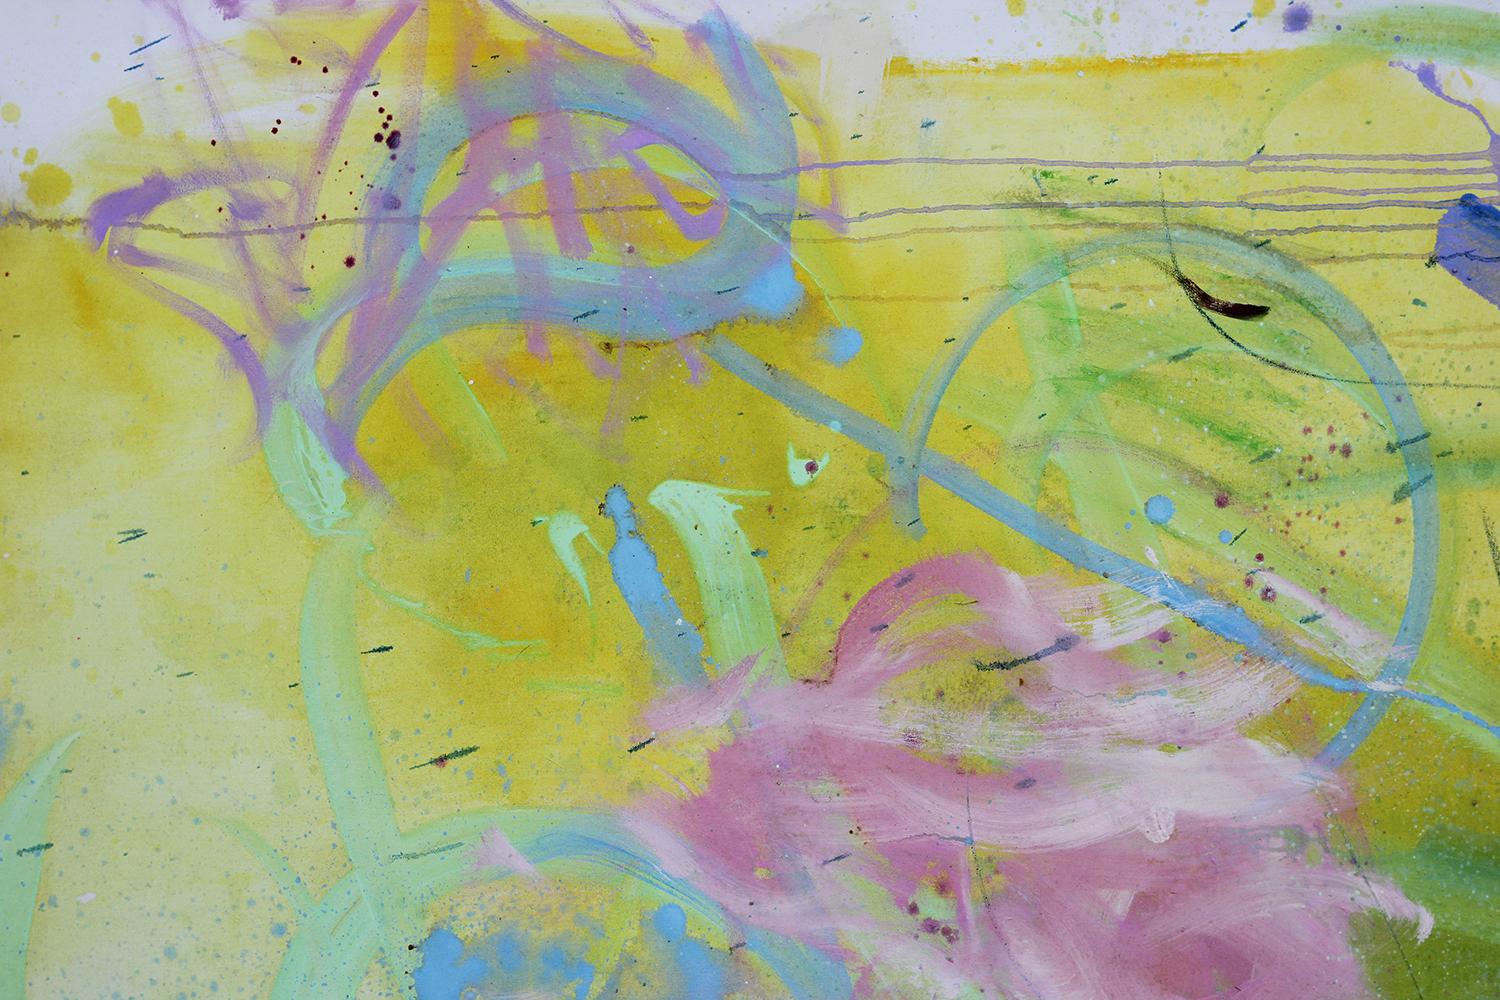 Large Bright Yellow, Green, Purple, and Pink Gestural Abstract Painting 5